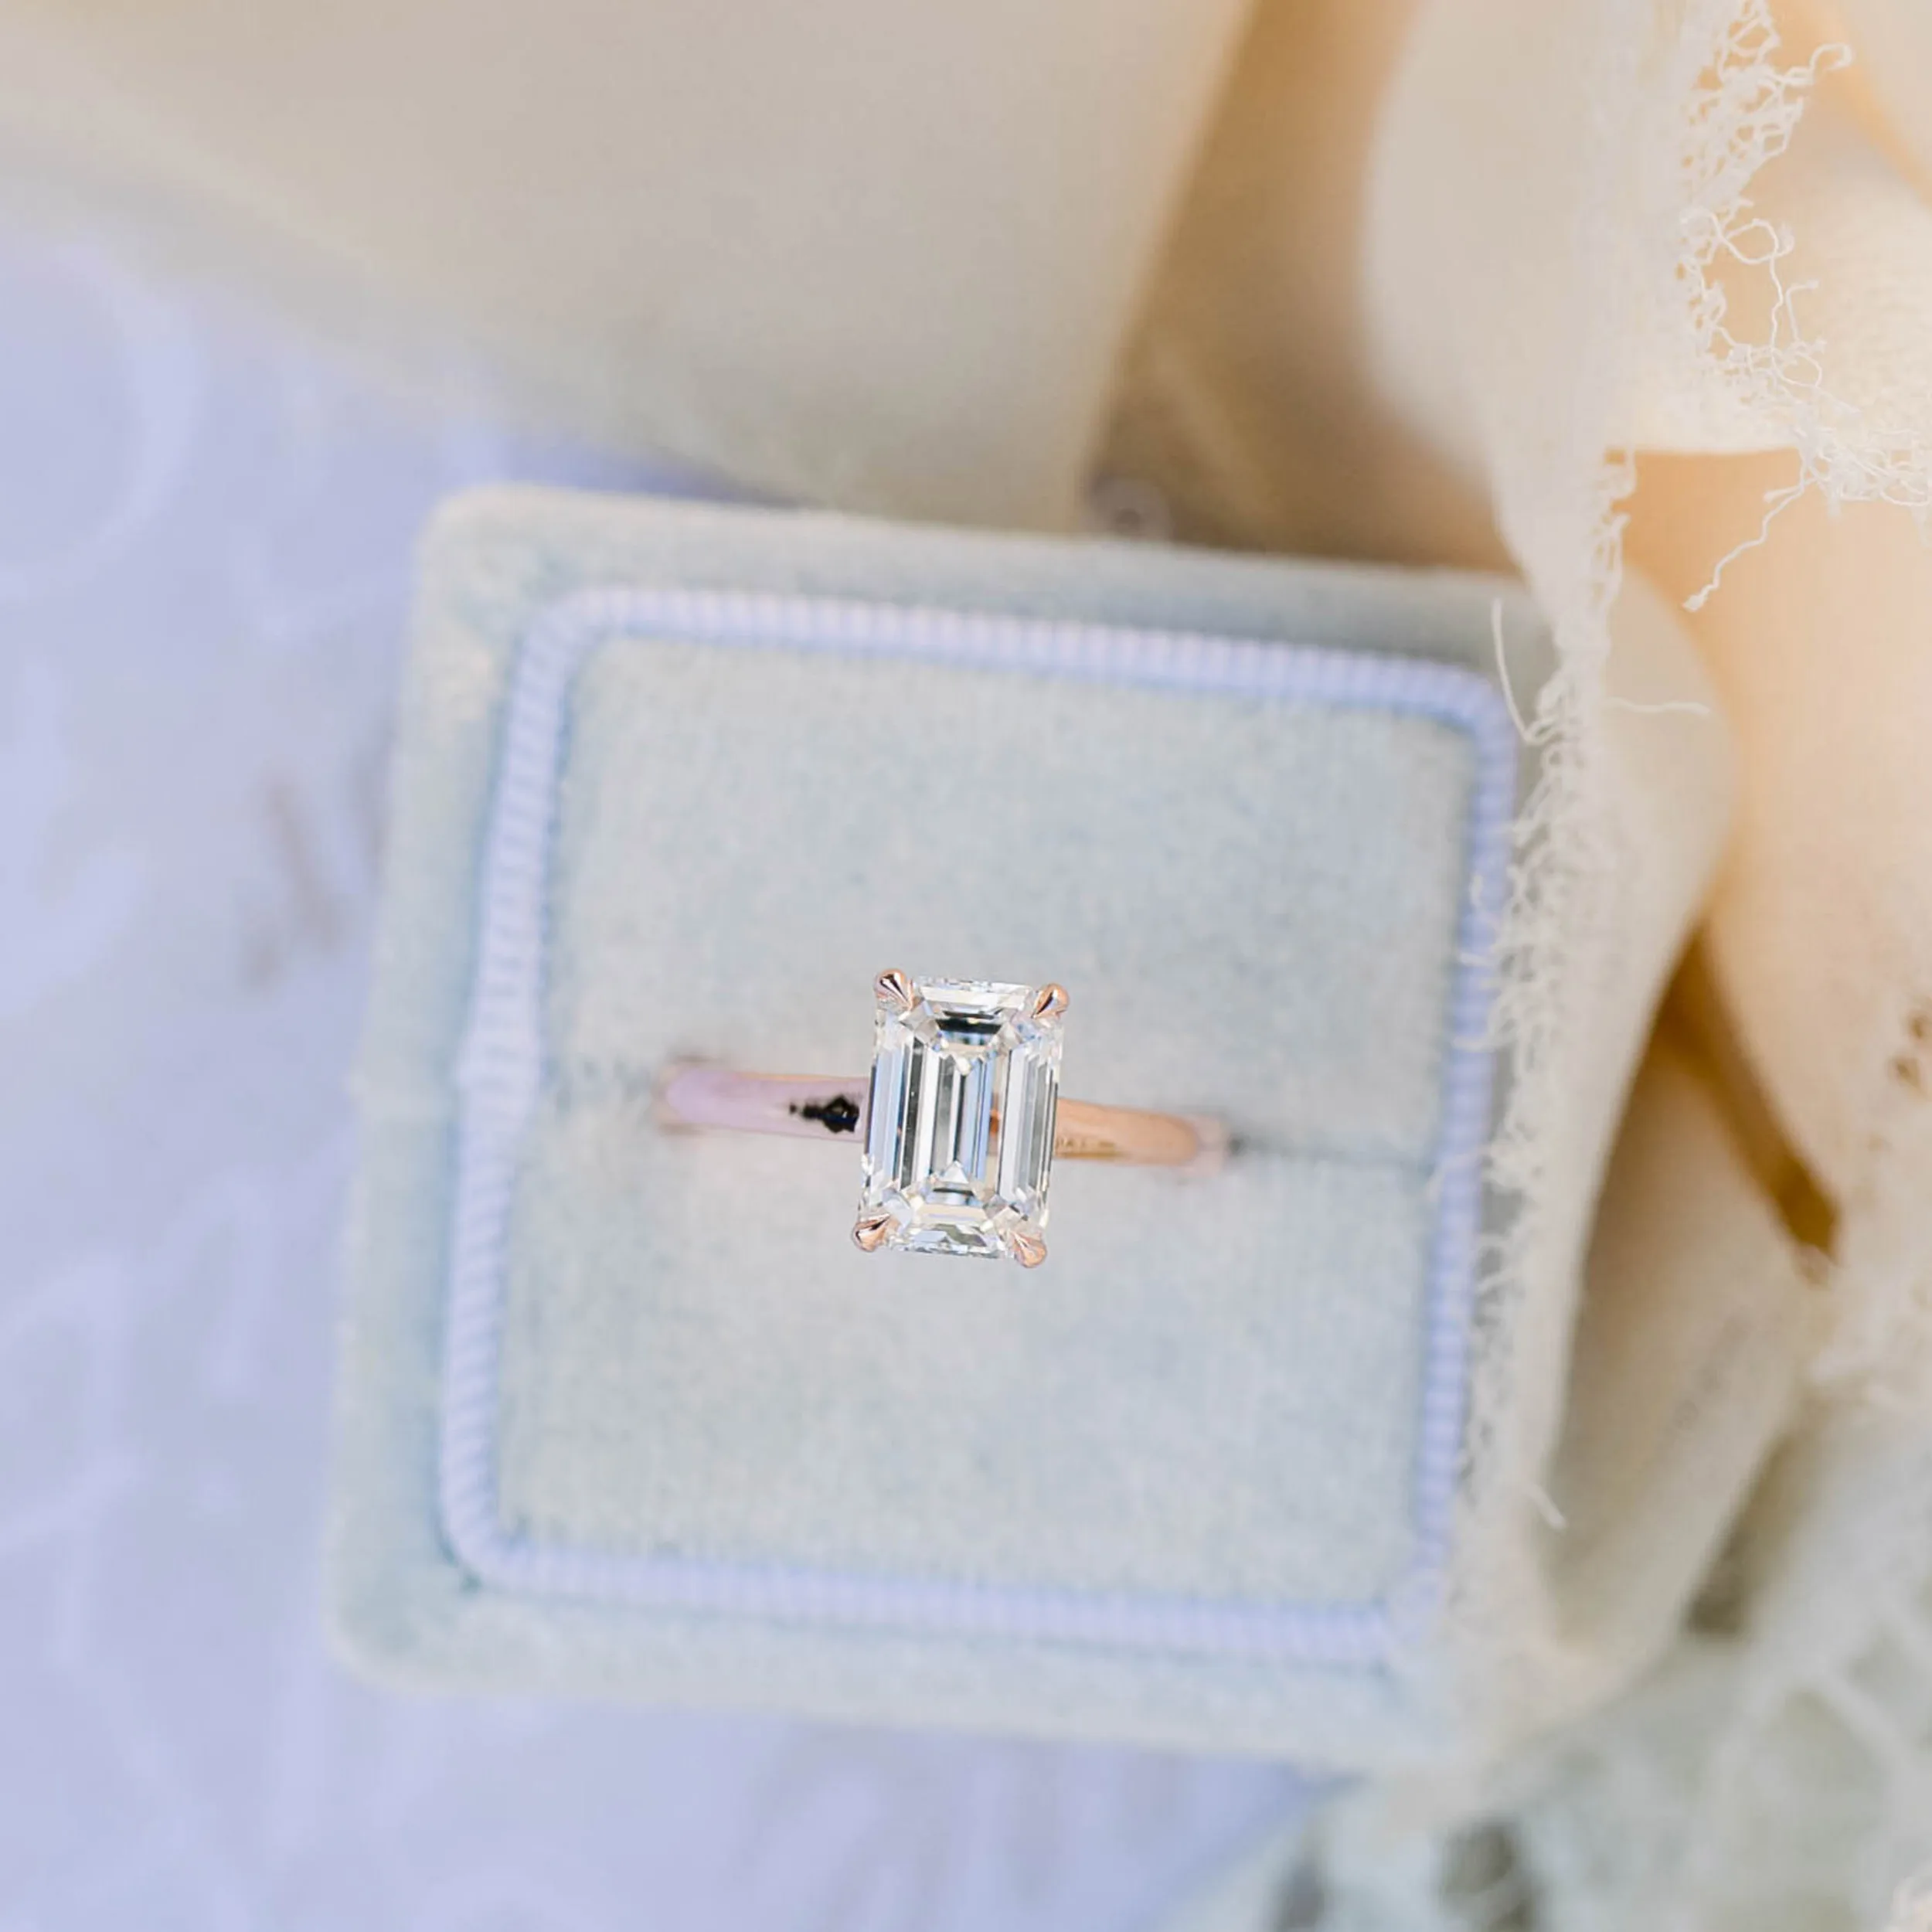 14k Rose Gold Cathedral Solitaire Engagement Ring with 1.5 Carat Emerald Cut Lab Created Diamond Ada Diamonds Design Number AD-068 Artistic Image in White Box